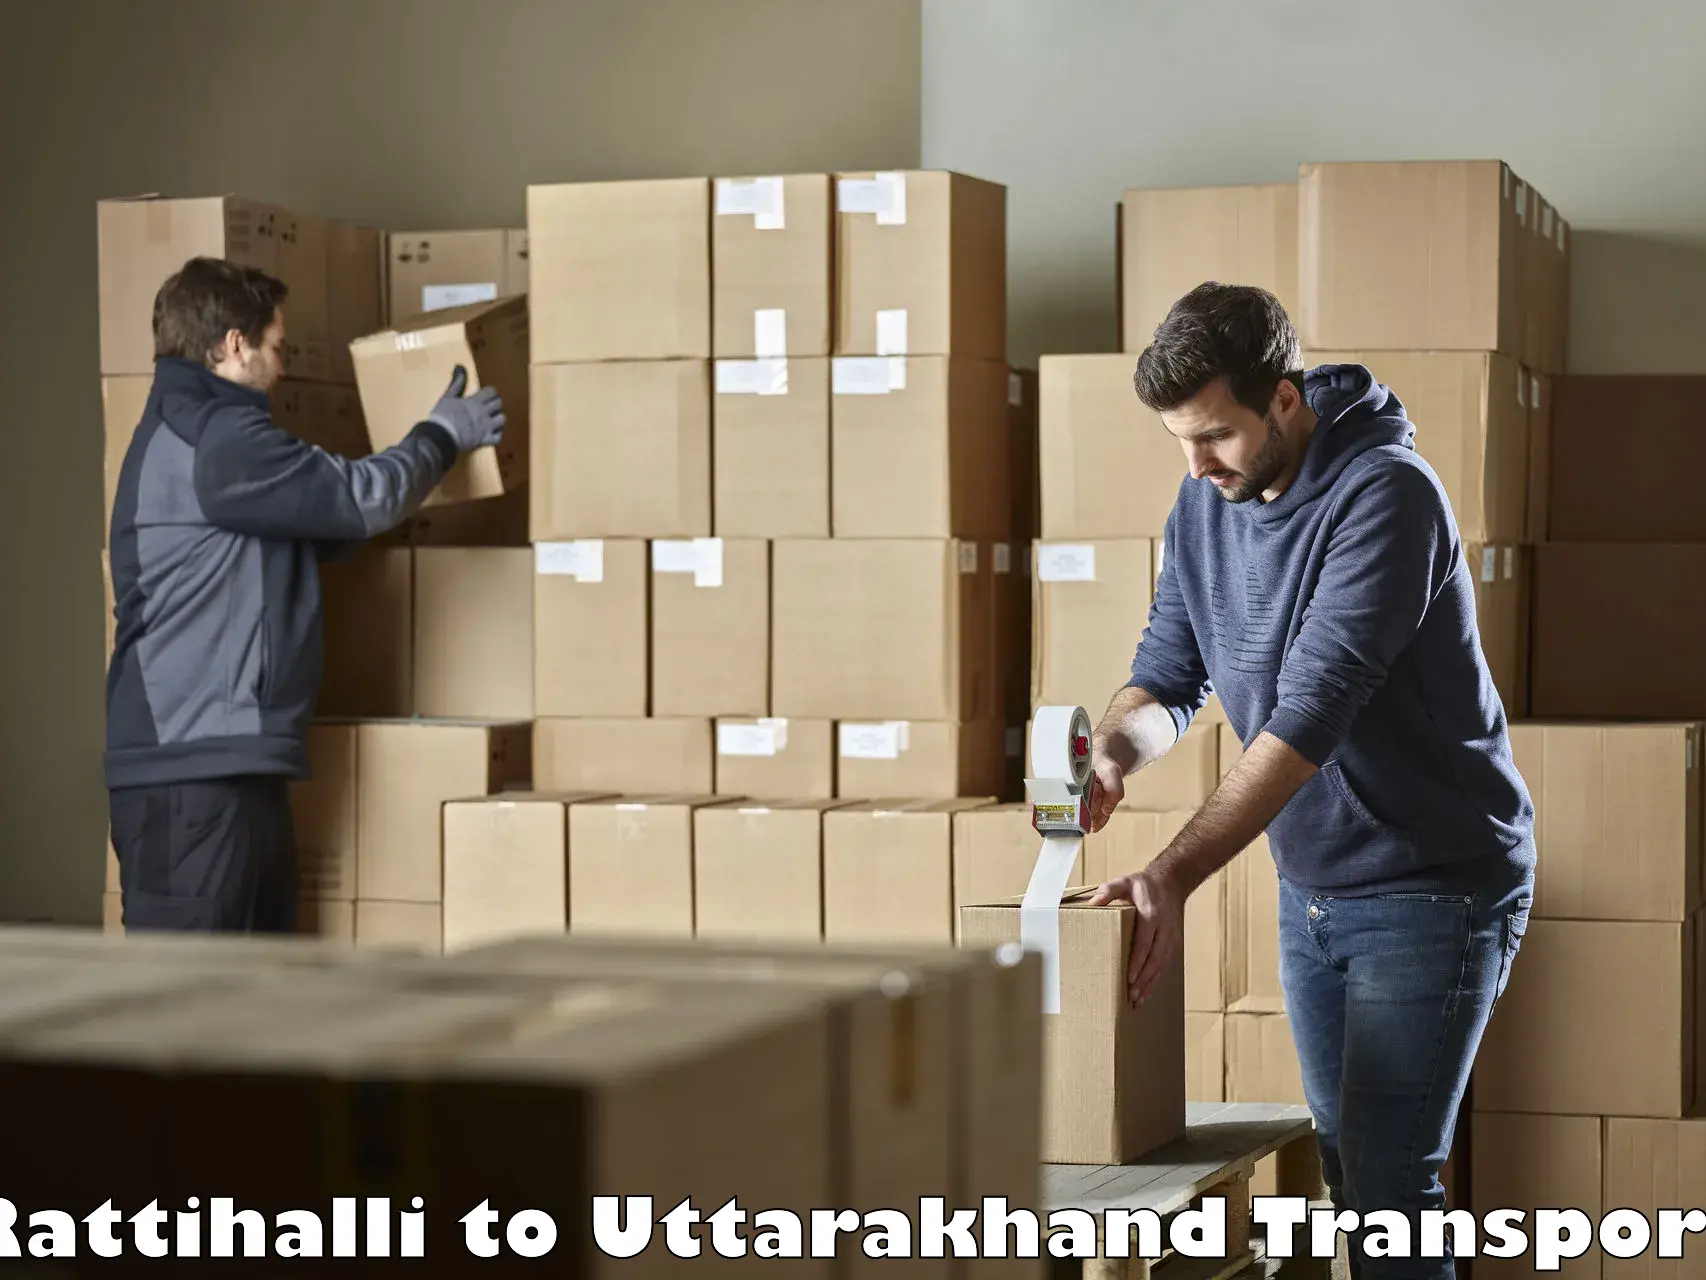 Commercial transport service Rattihalli to Dwarahat